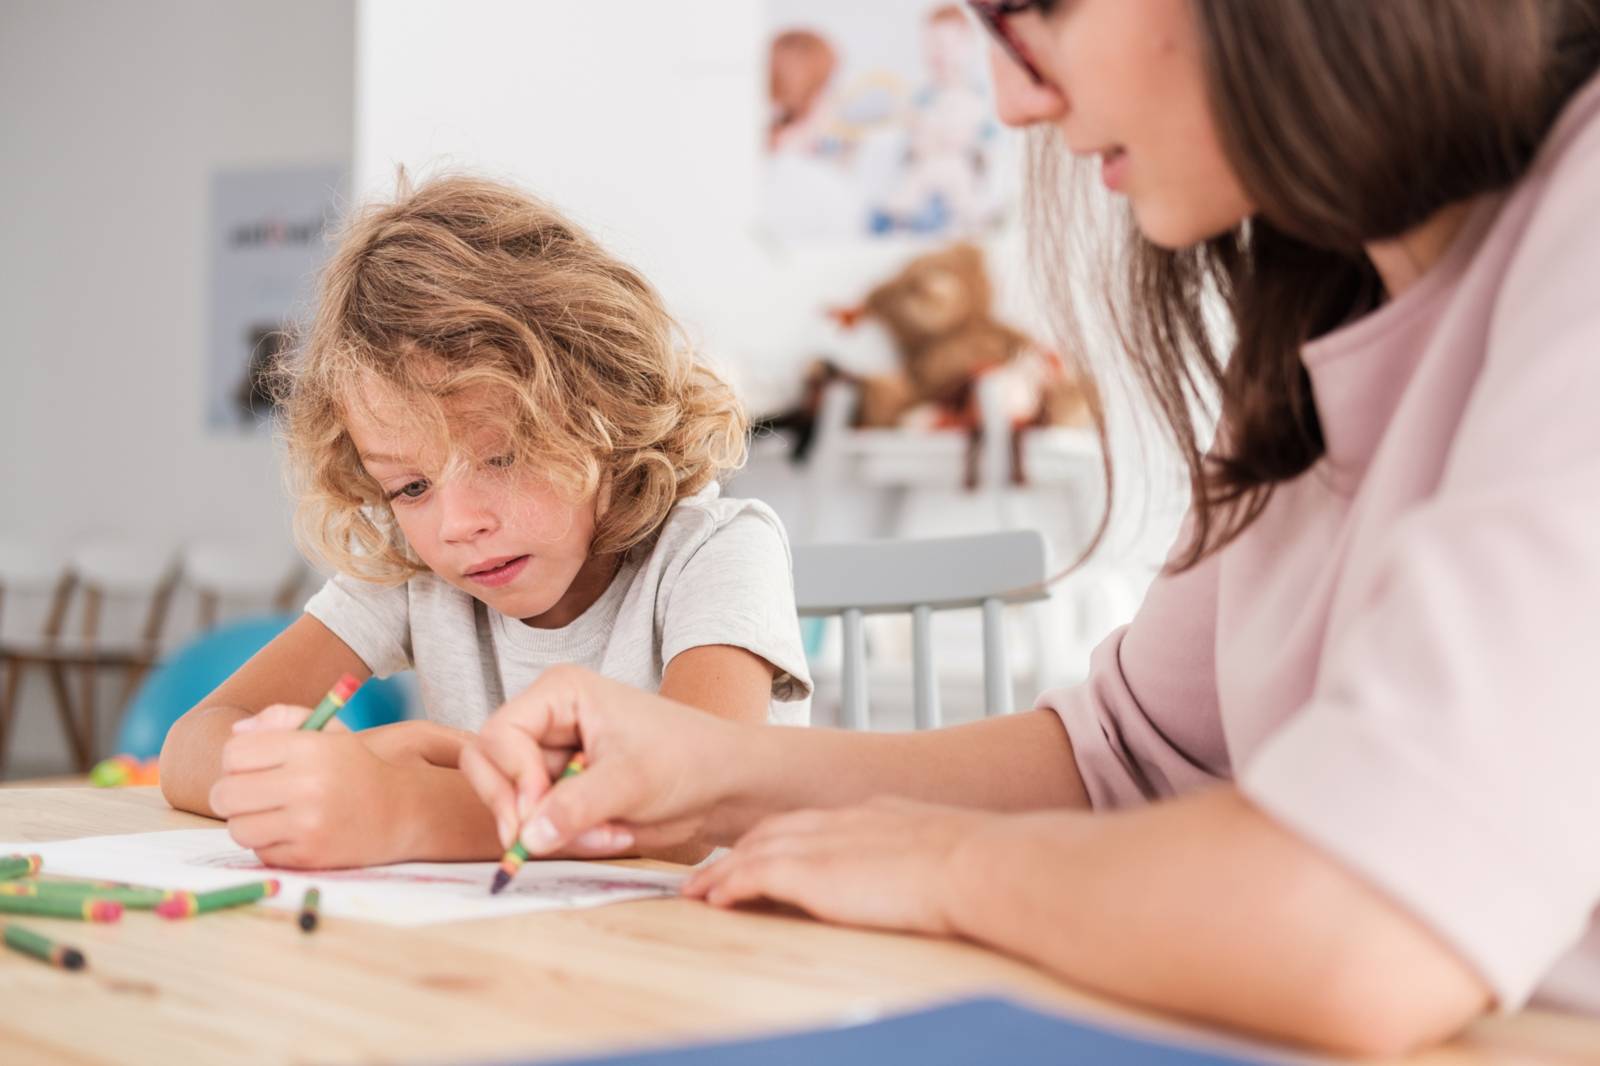 Teacher and child drawing together